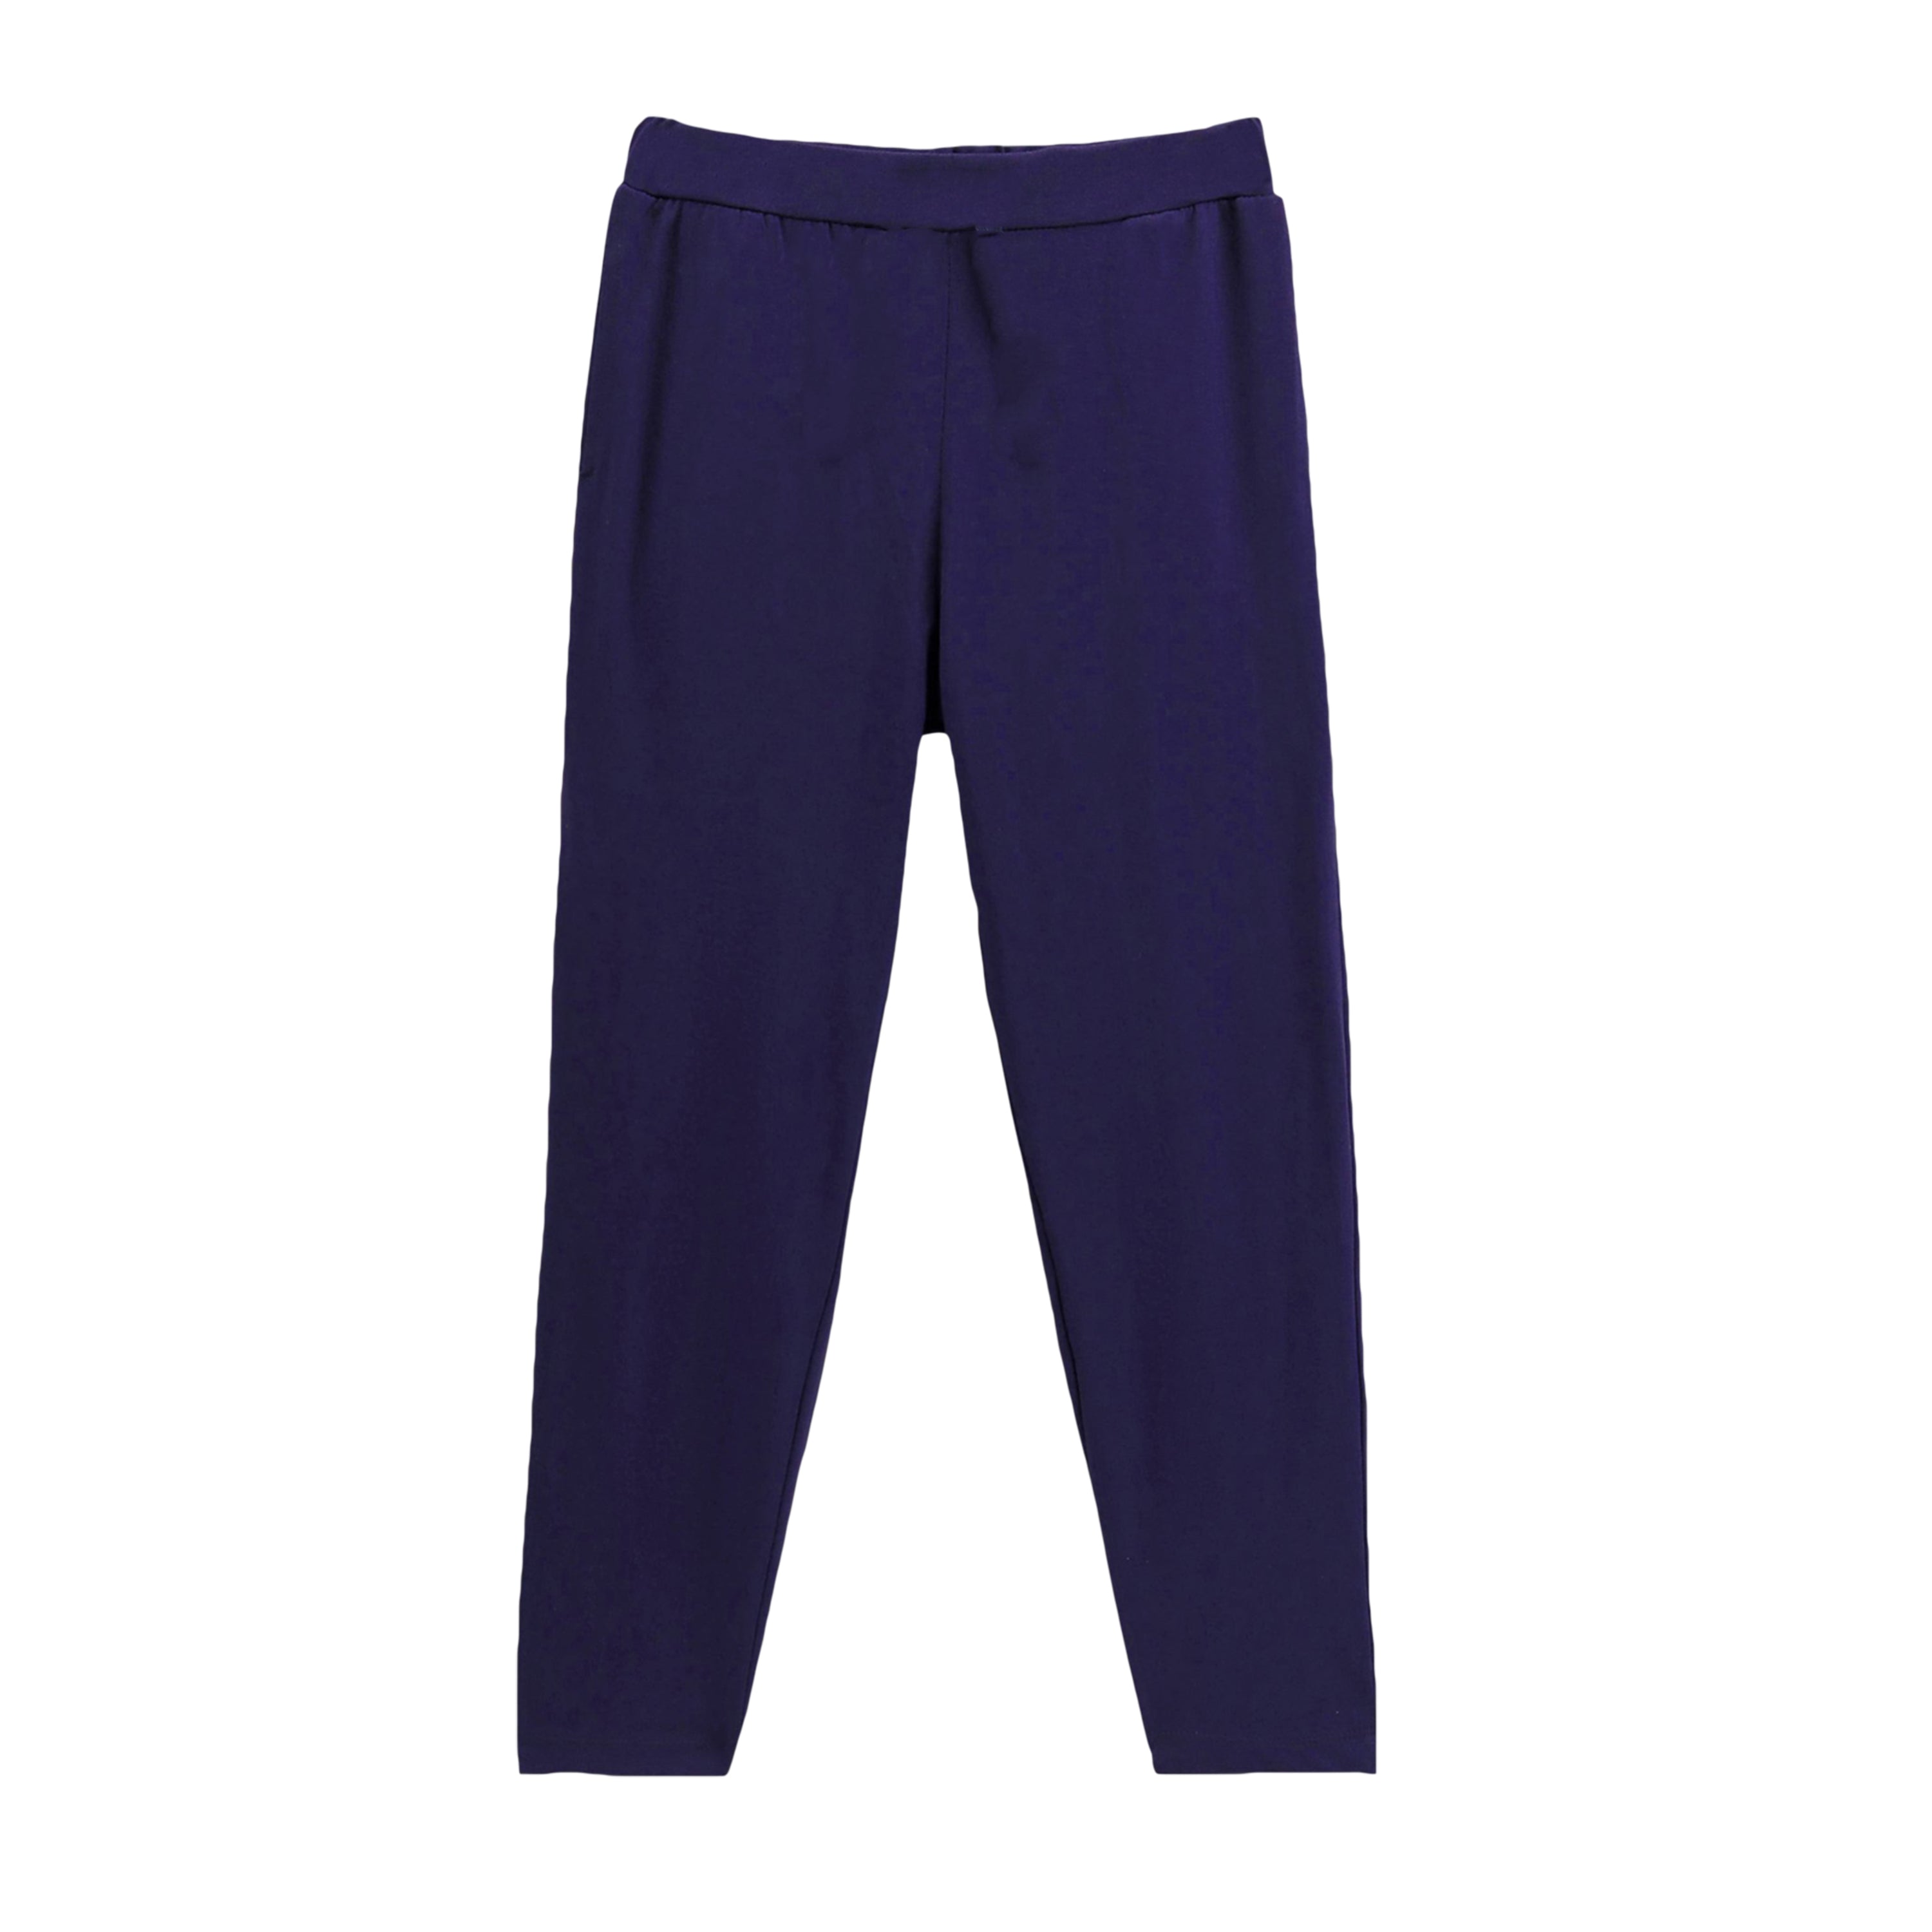 Kids Navy Solid Cotton Track pants